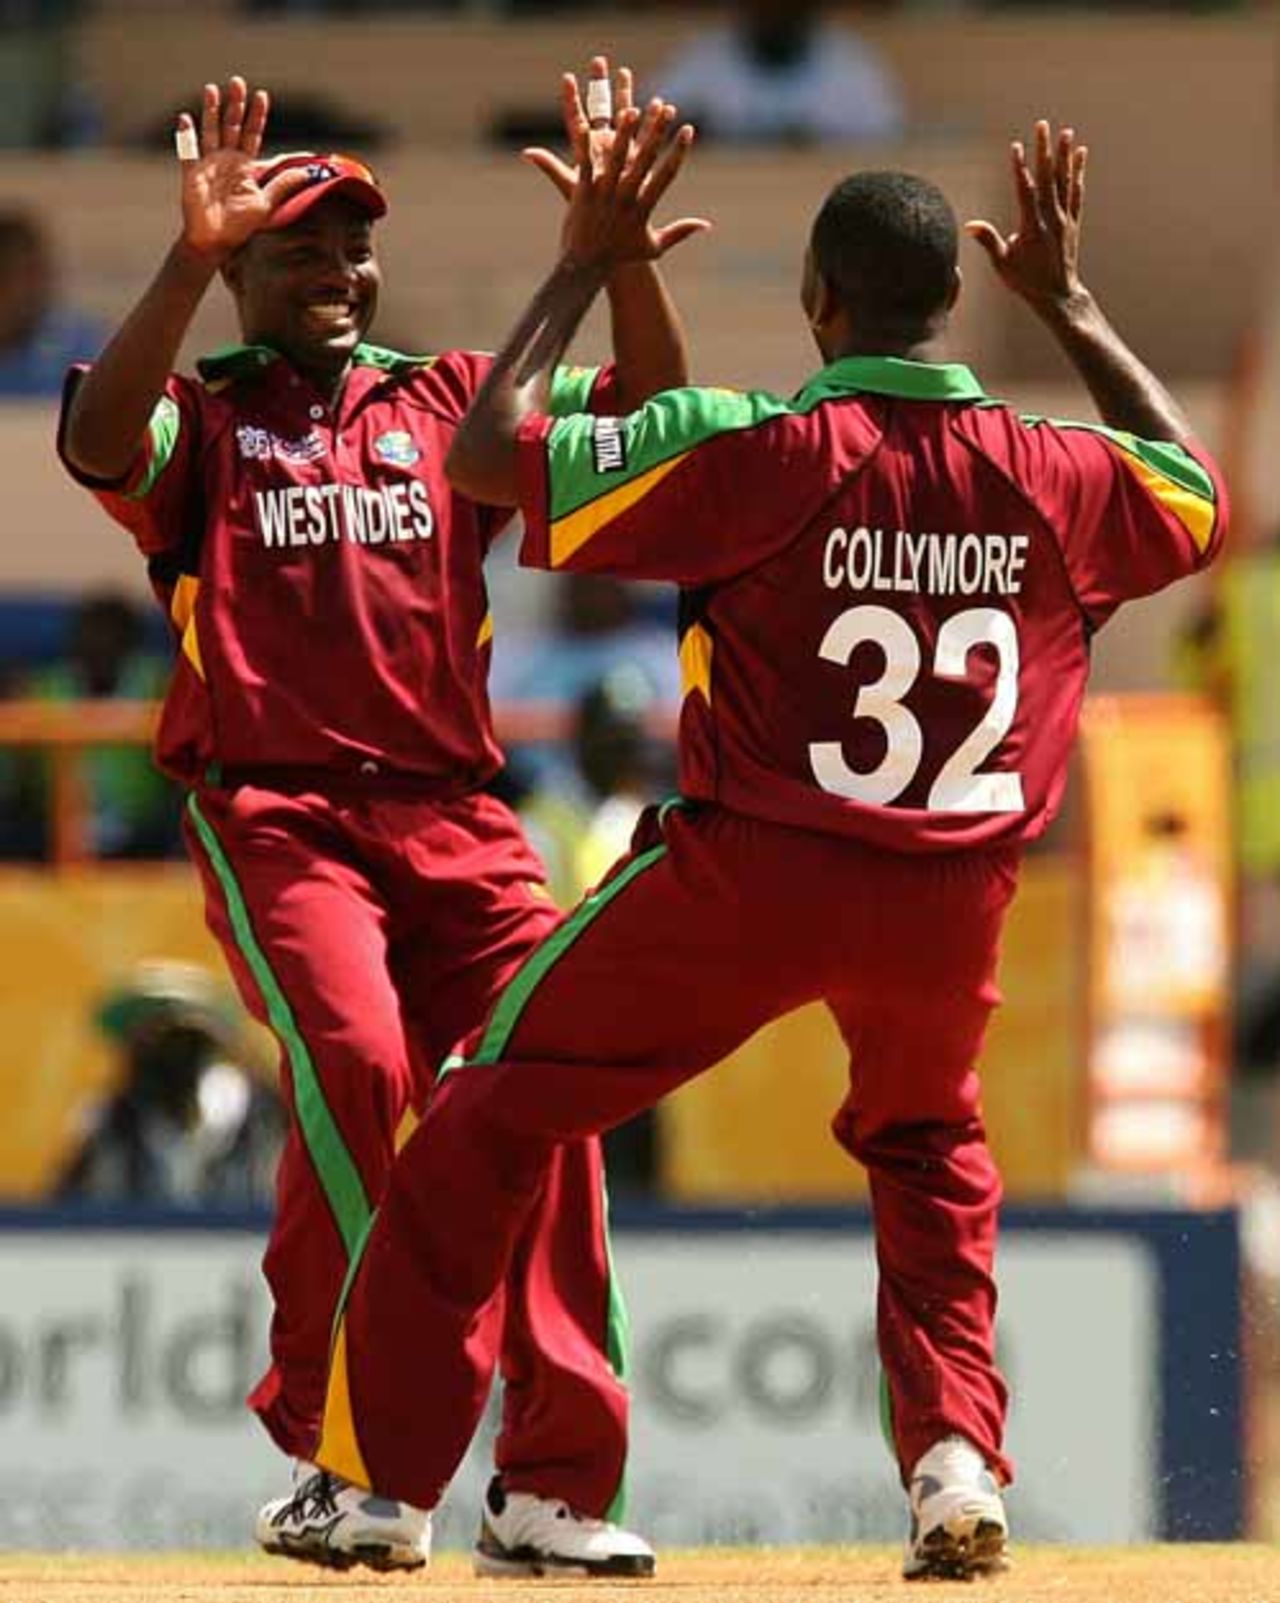 Brian Lara congraulates Corey Collymore on getting the wicket of Graeme Smith, South Africa v West Indies, Super Eights, Grenada, April 10, 2007